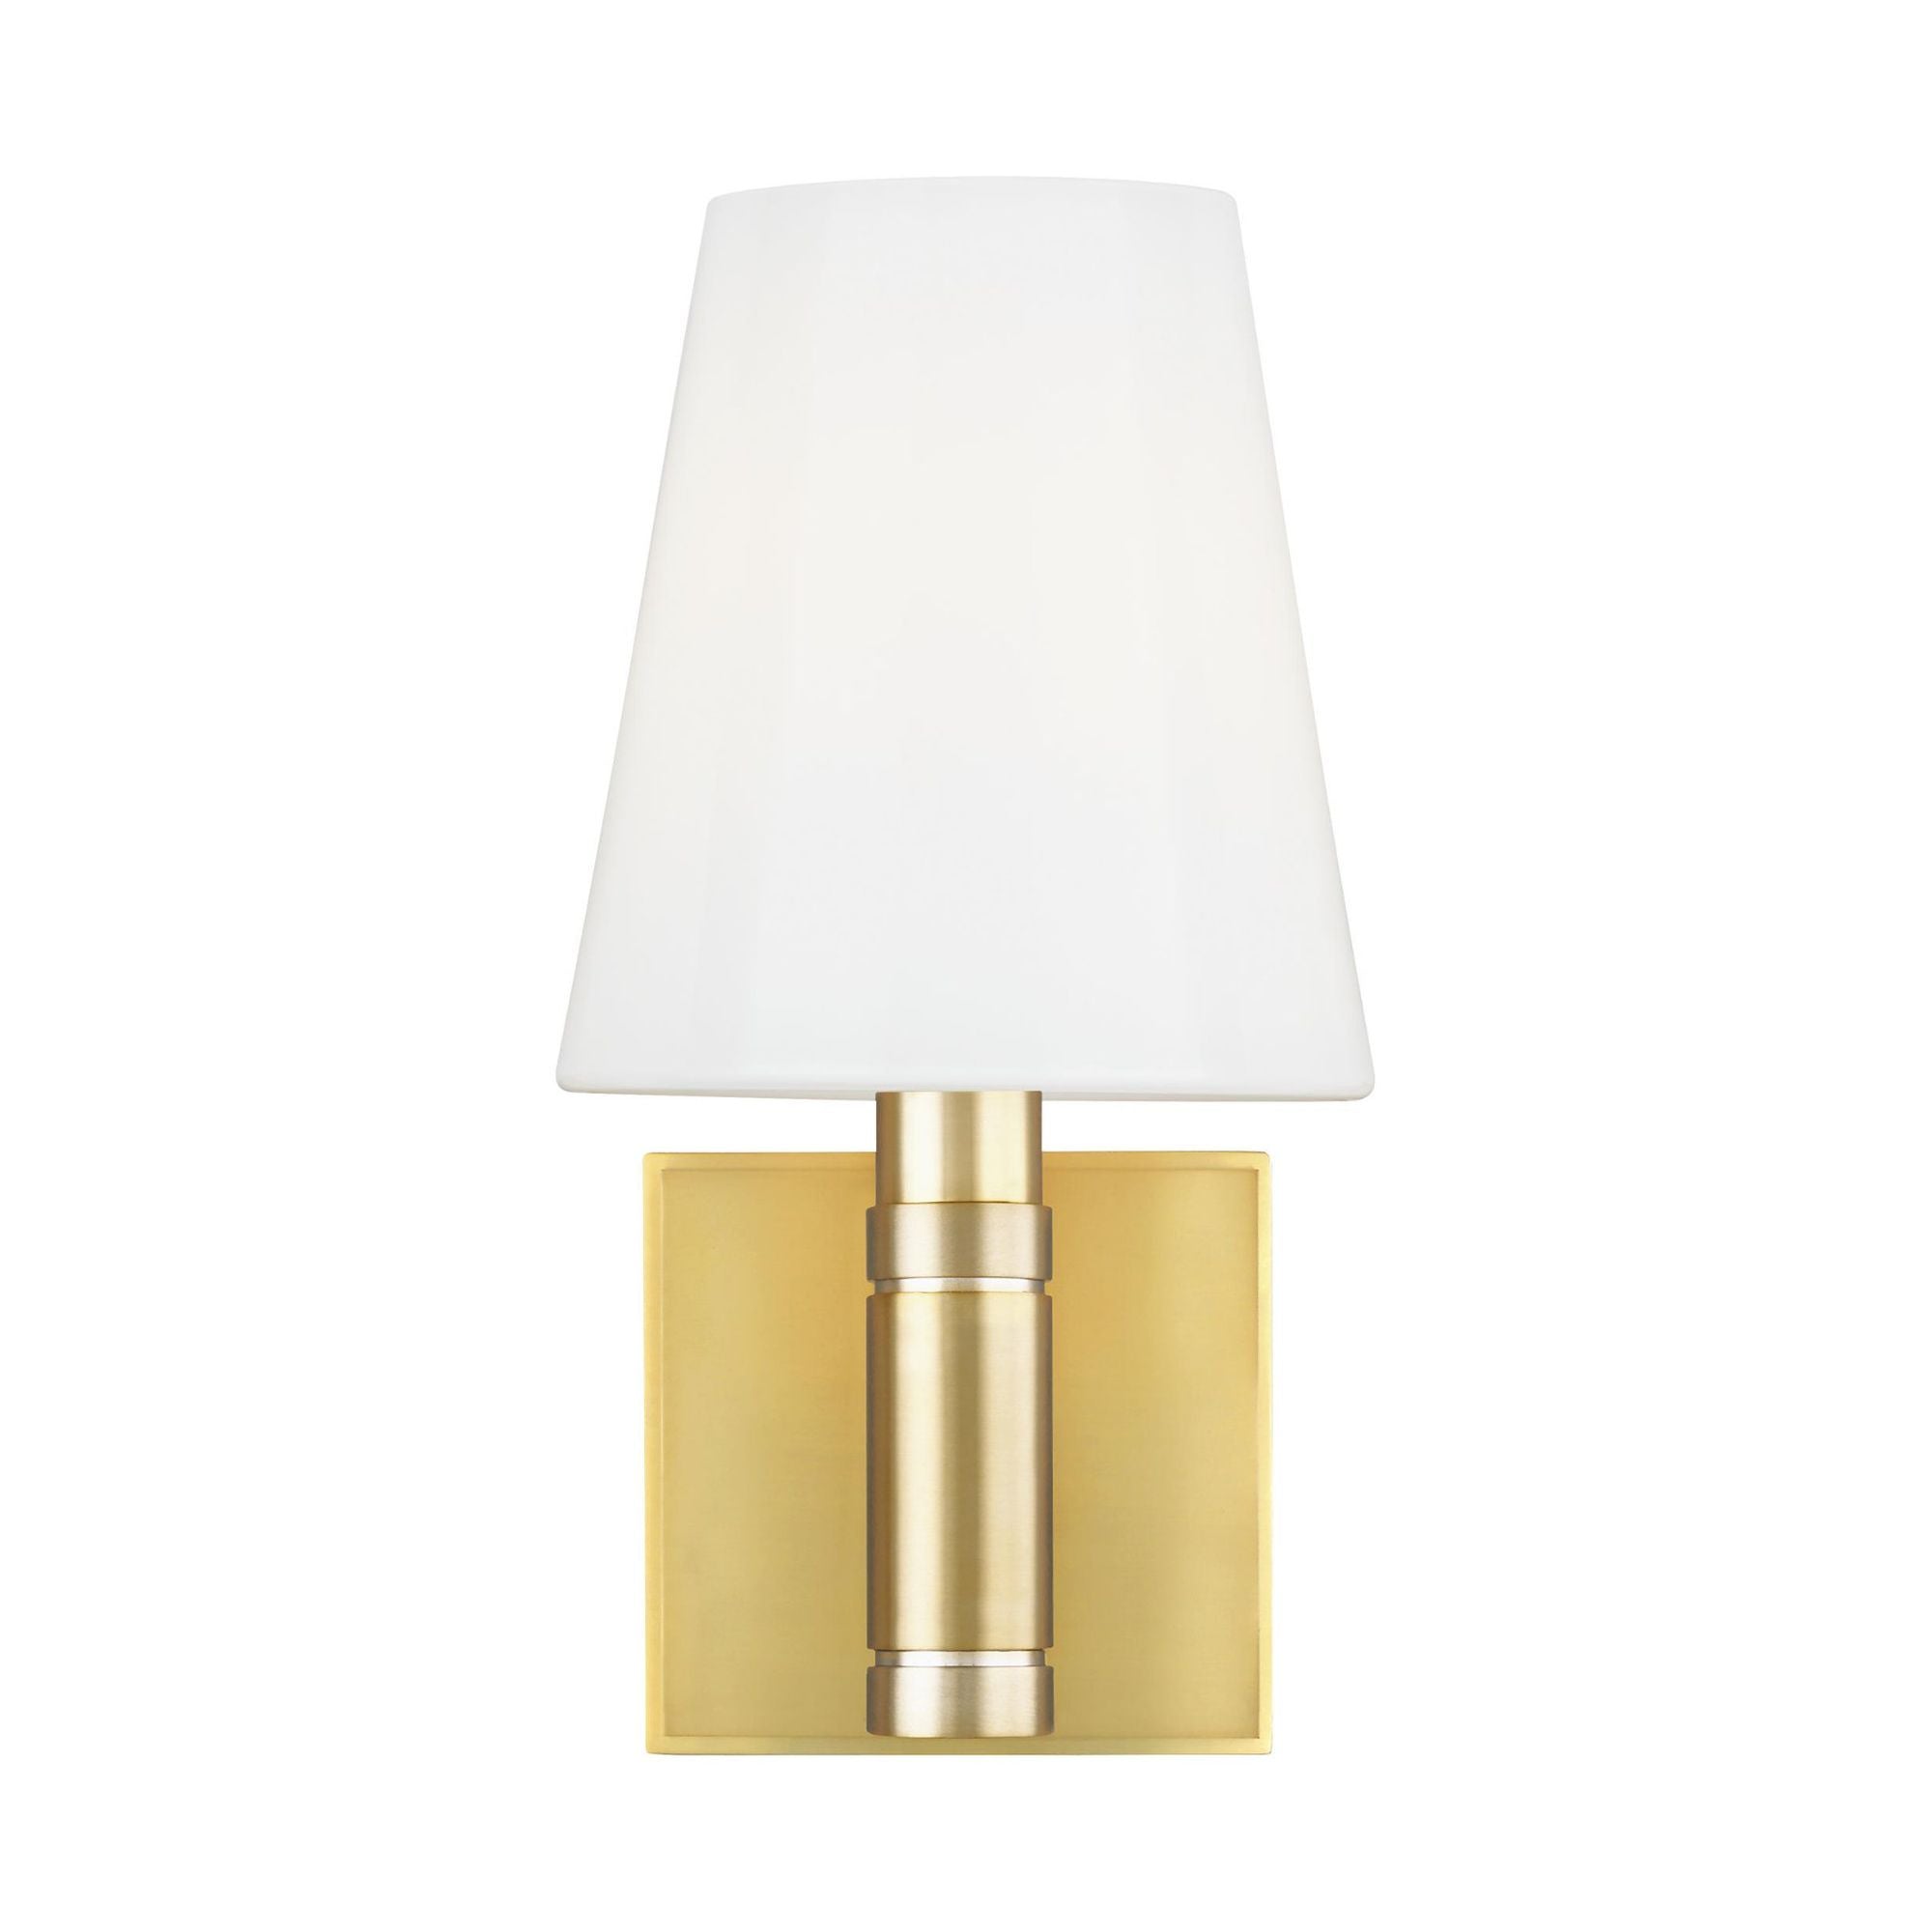 Thomas O'Brien Beckham Classic Square Sconce in Burnished Brass